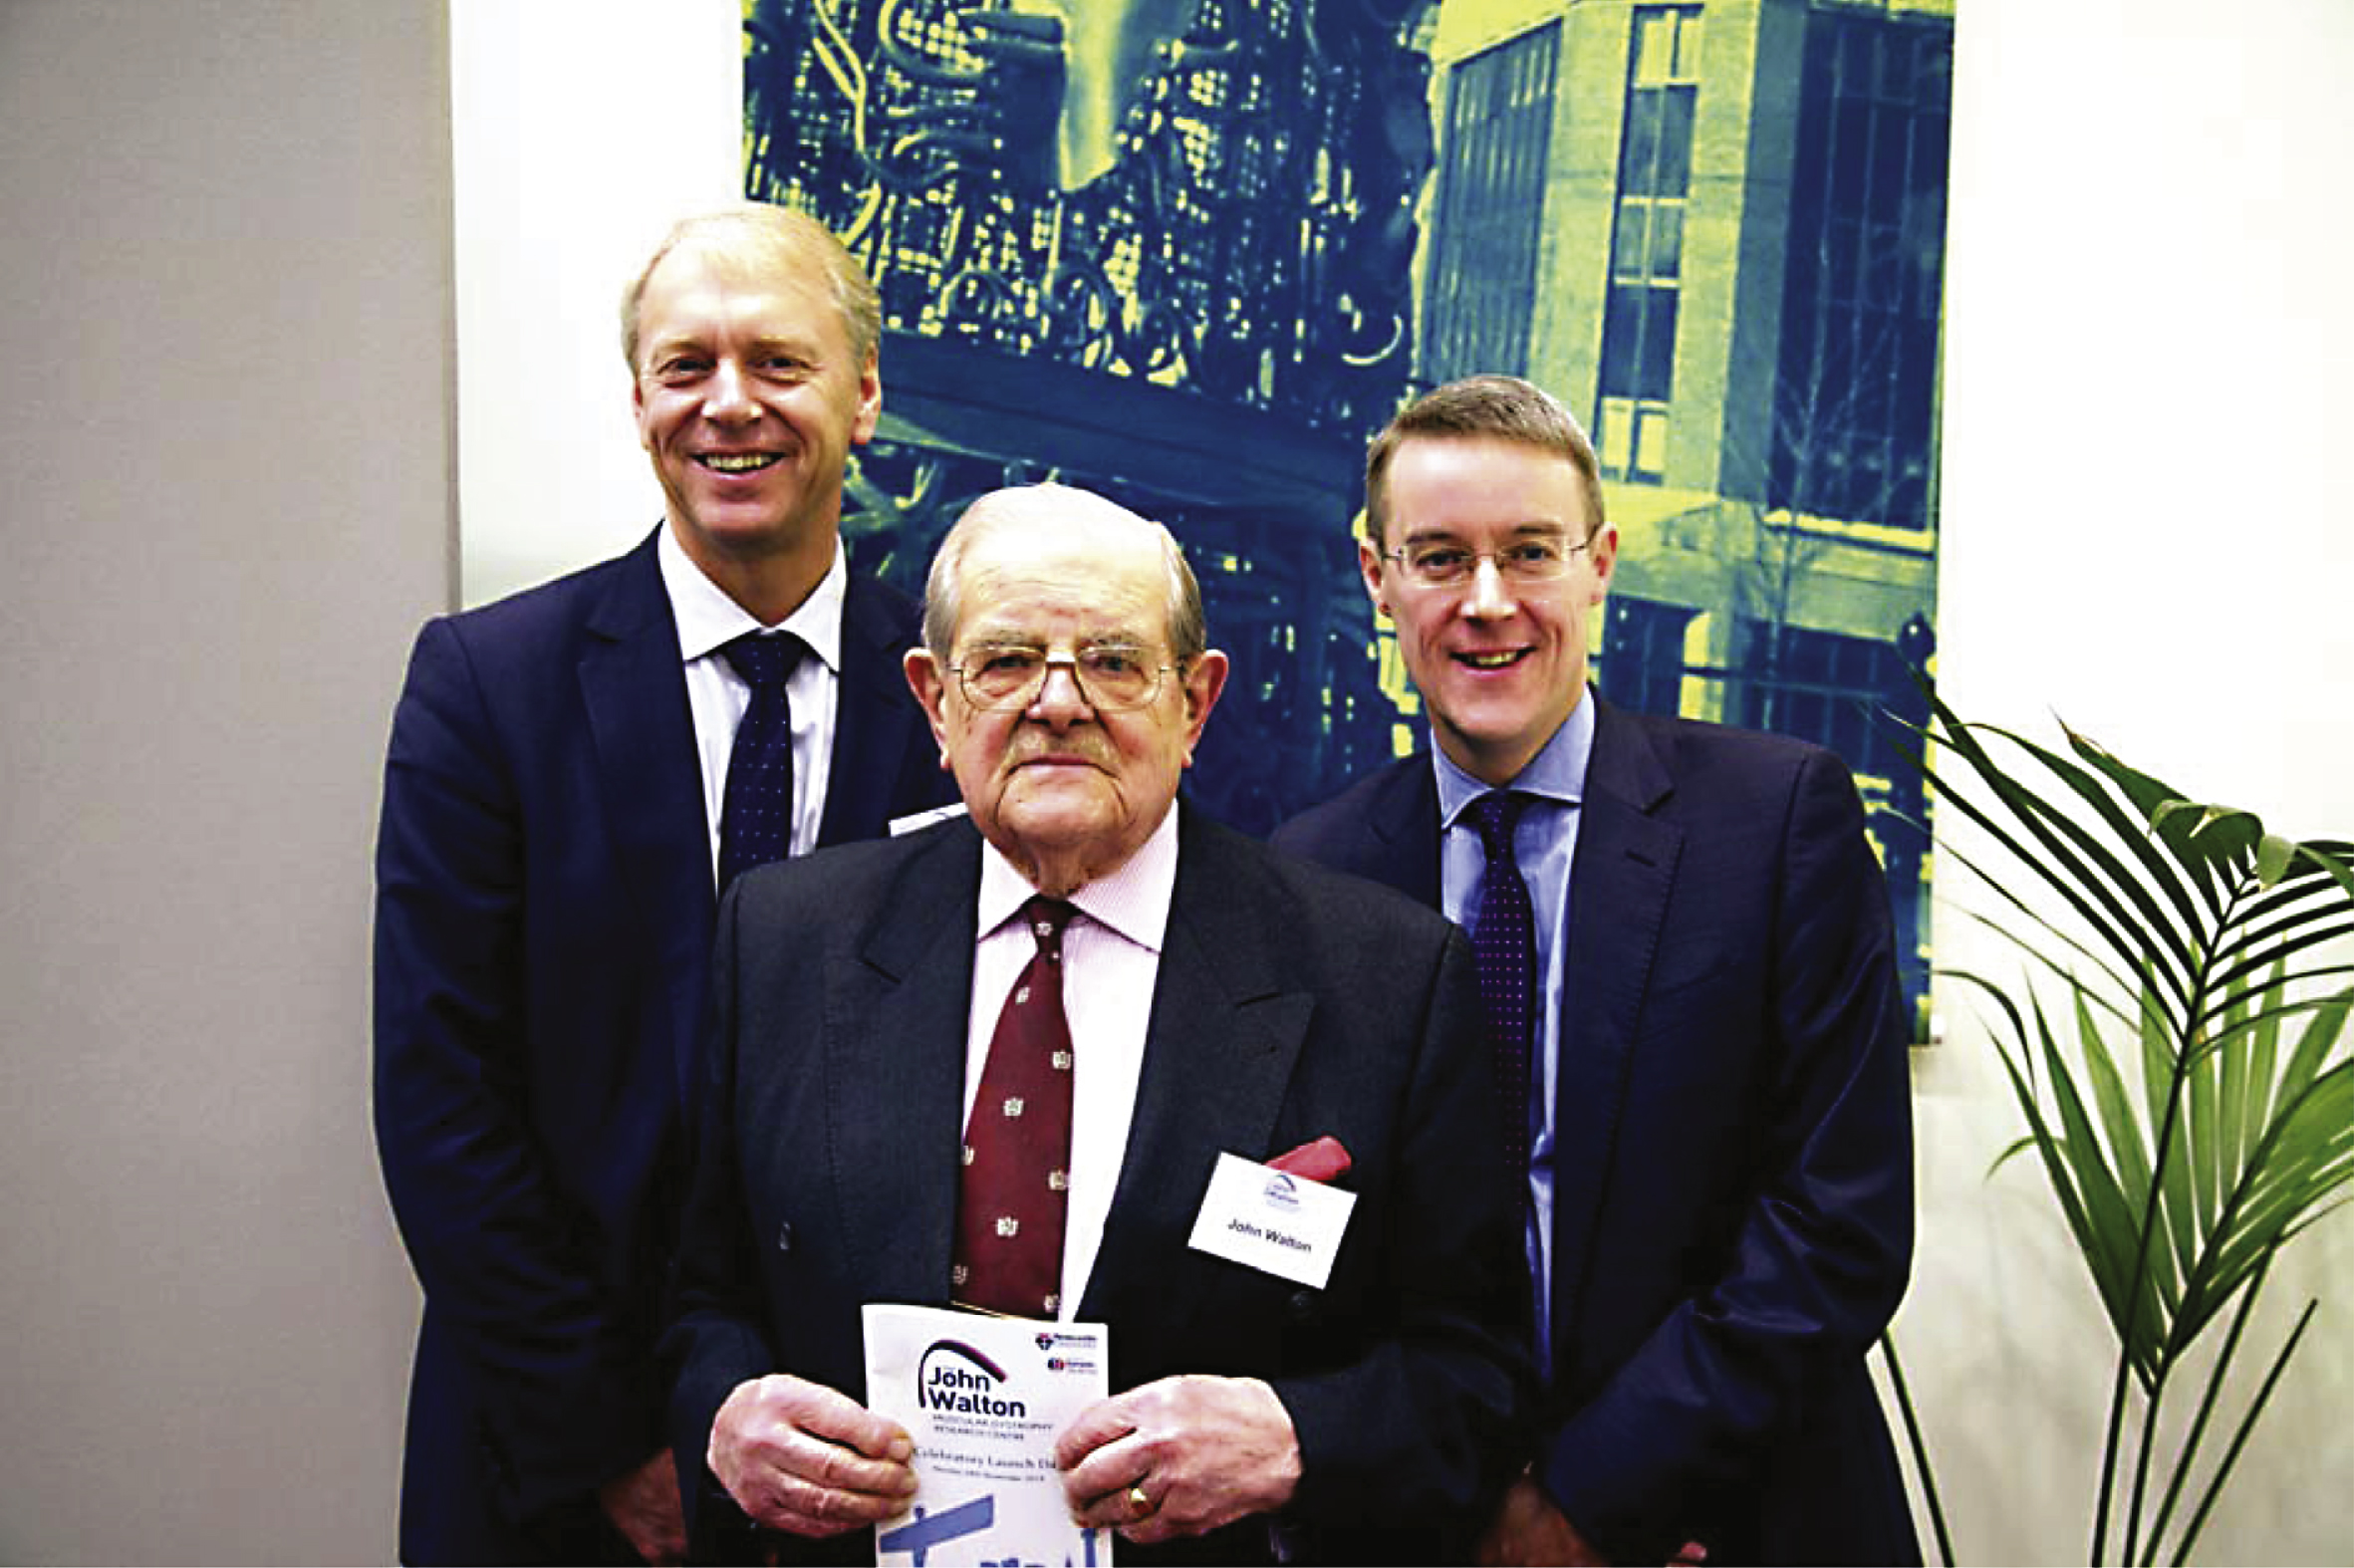 Lord Walton (middle) with Professor Chris Day (Pro-Vice-Chancellor, Faculty of Medical Sciences, Newcastle University, left) and Professor Patrick Chinnery (Director Institute of Genetic Medicine, Newcastle University, right) during the launch of The Newcastle University John Walton Muscular Dystrophy Research Centre on November 24, 2014.